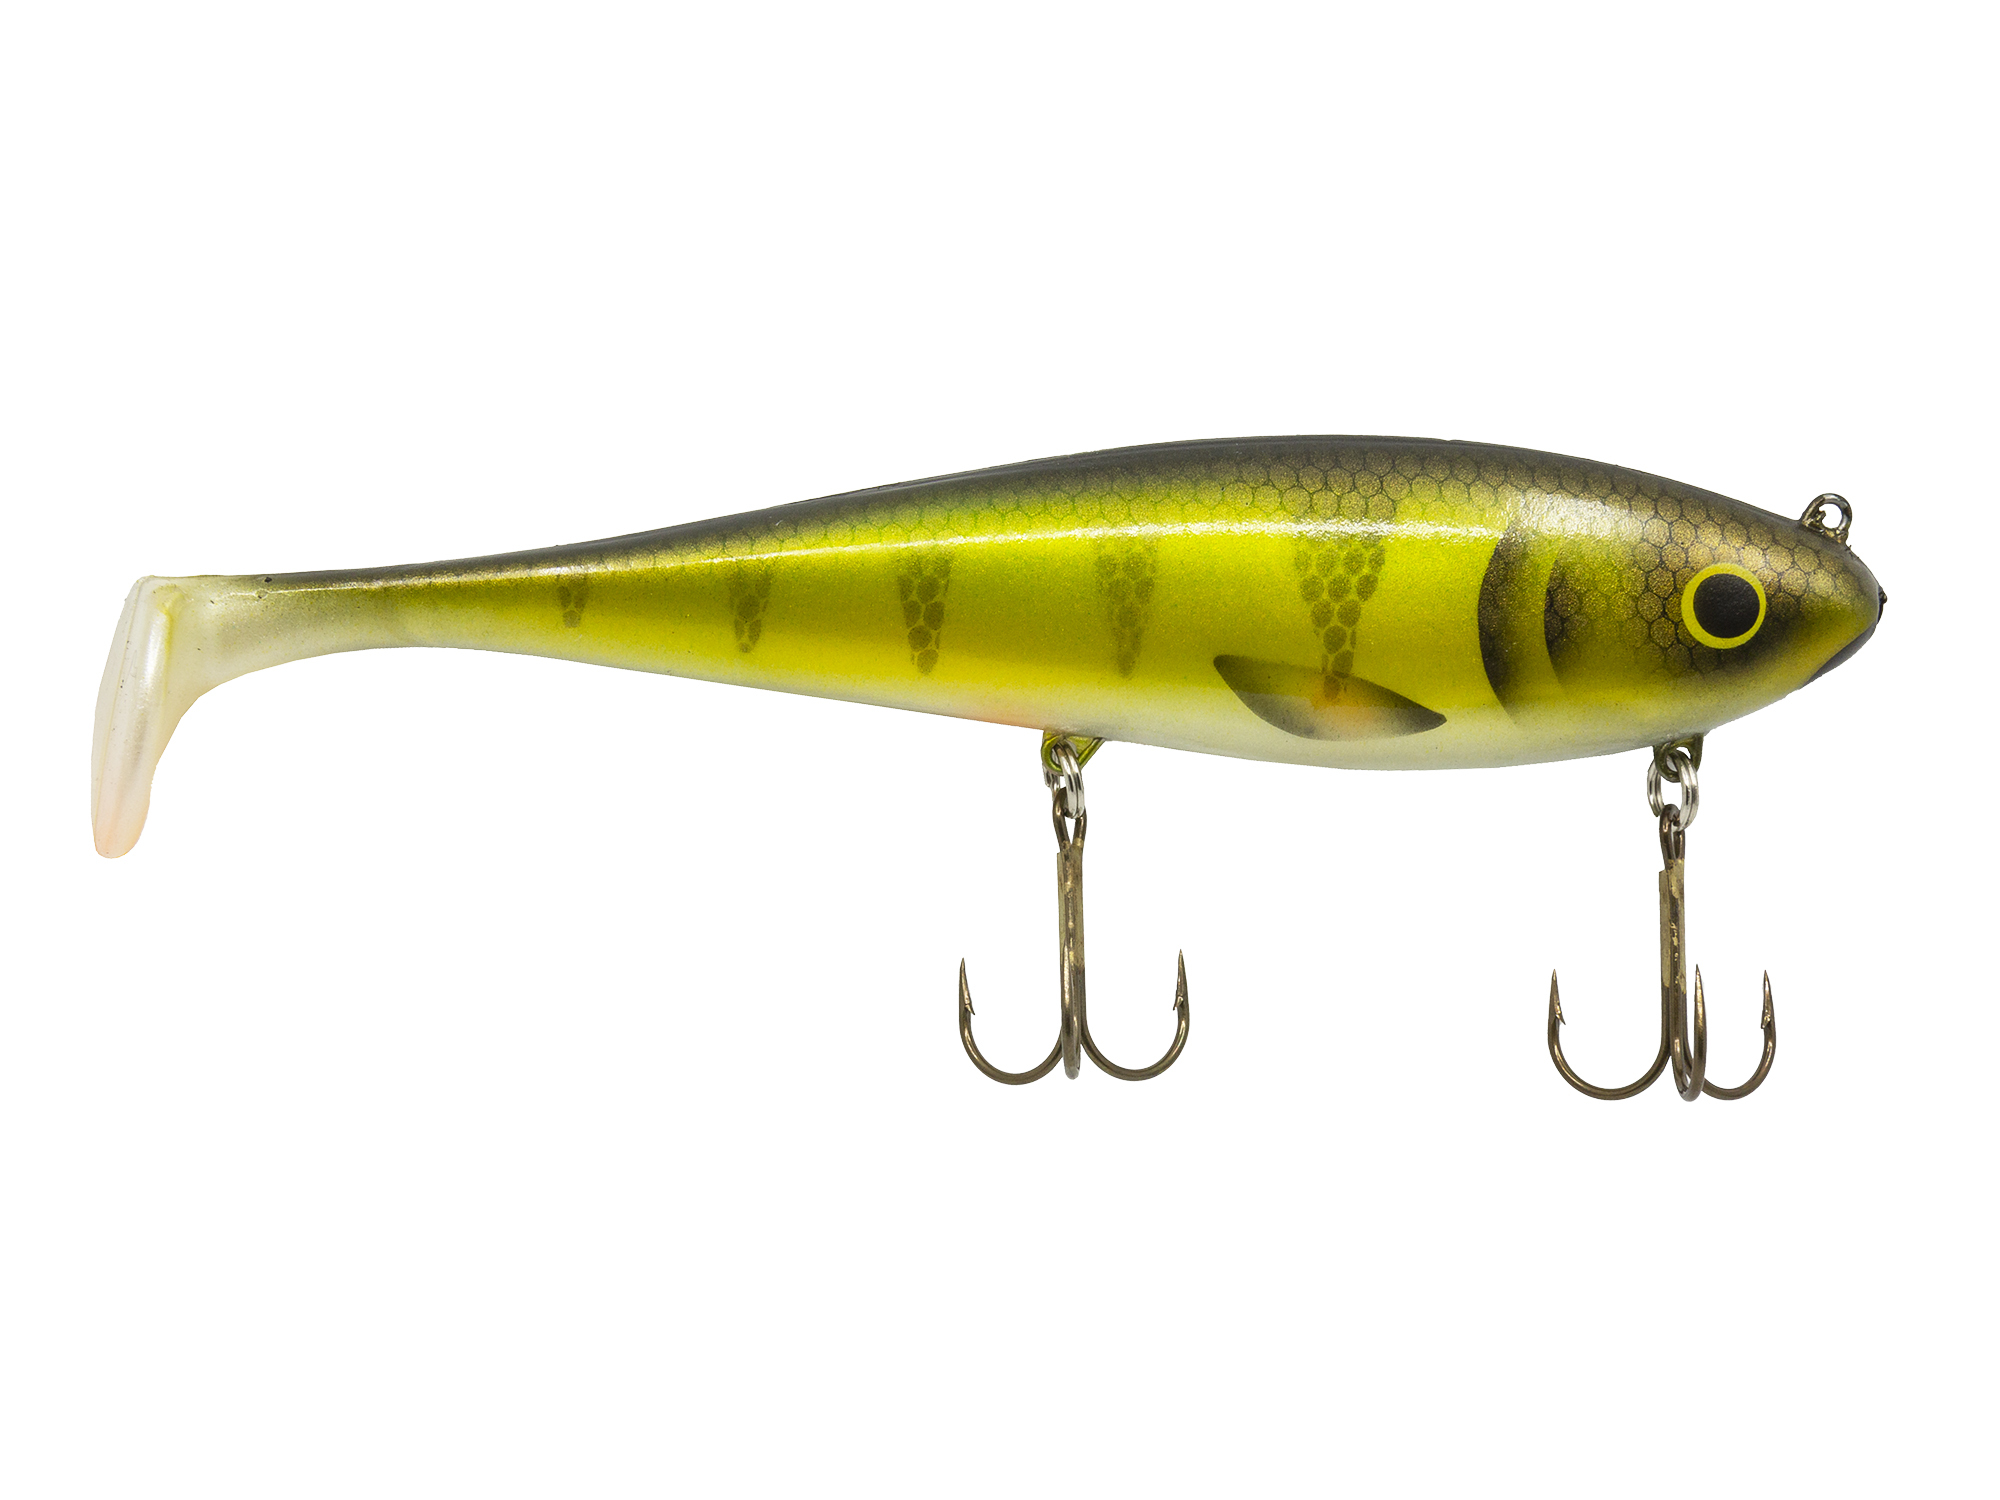 KVD Sexy Dawg Lure 4.5 Topwater Lure LOT OF 2 Color: Bluegill